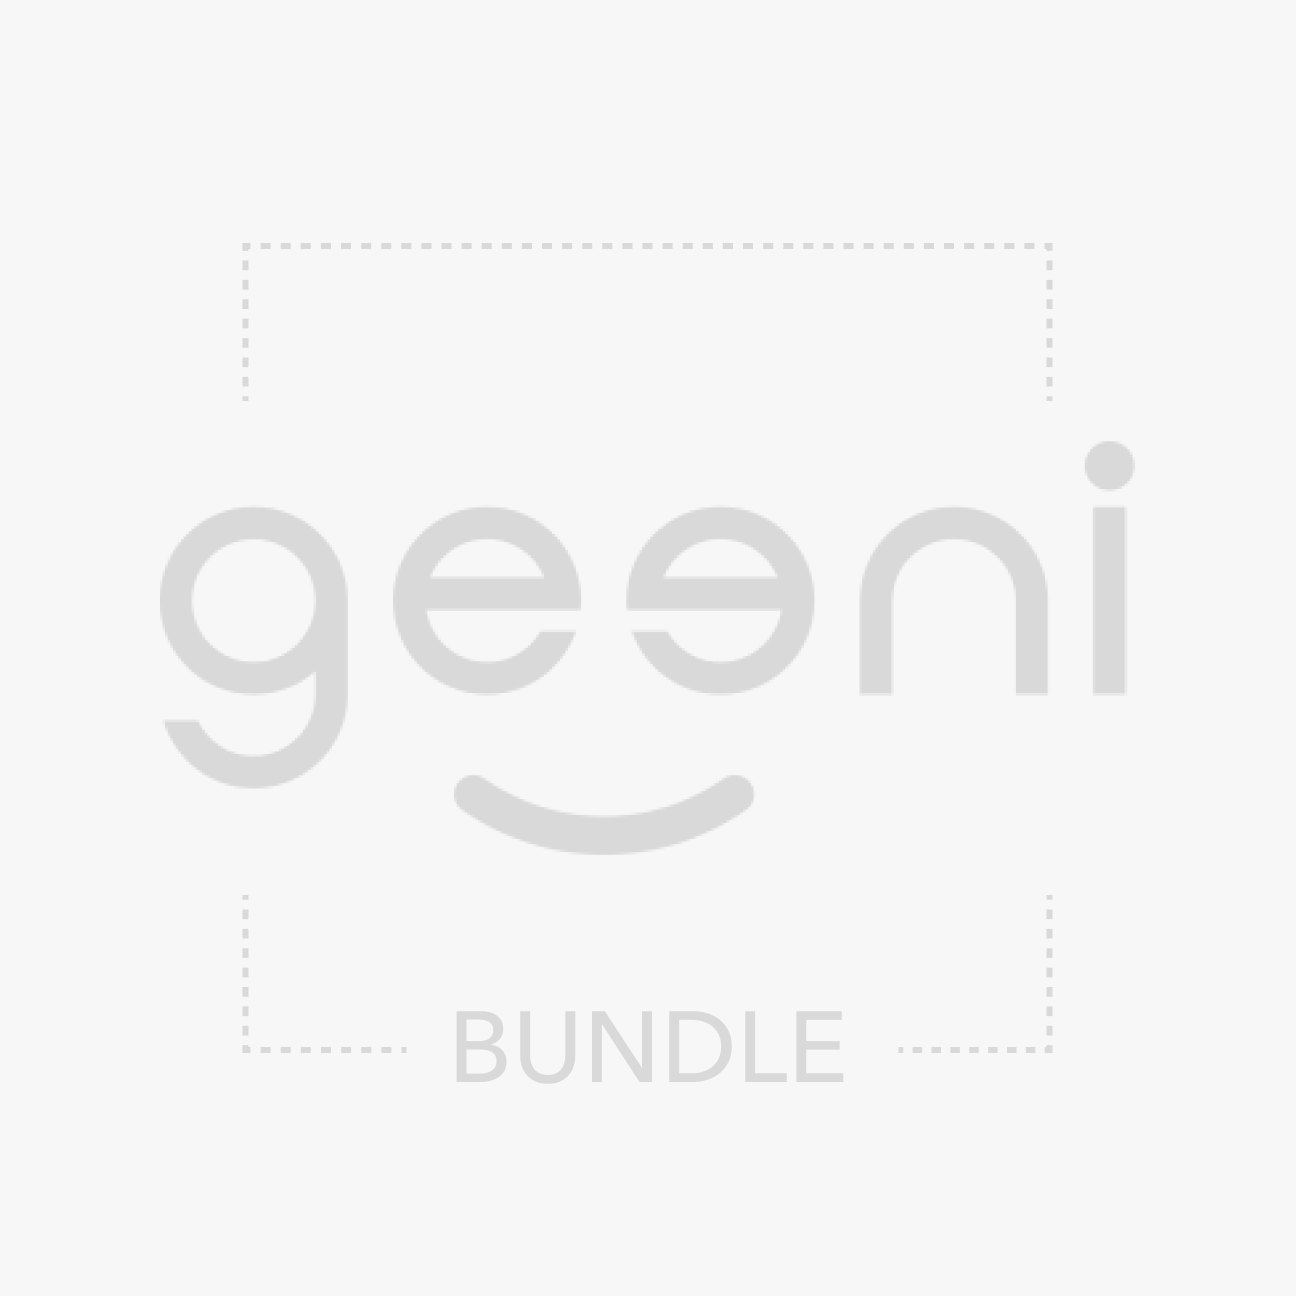 Geeni Indoor/Outdoor String Light - 72 ft. + Geeni Prisma Plus 800 Tunable Wi-Fi LED Smart E26 A19 Light Bulb (4-Pack)